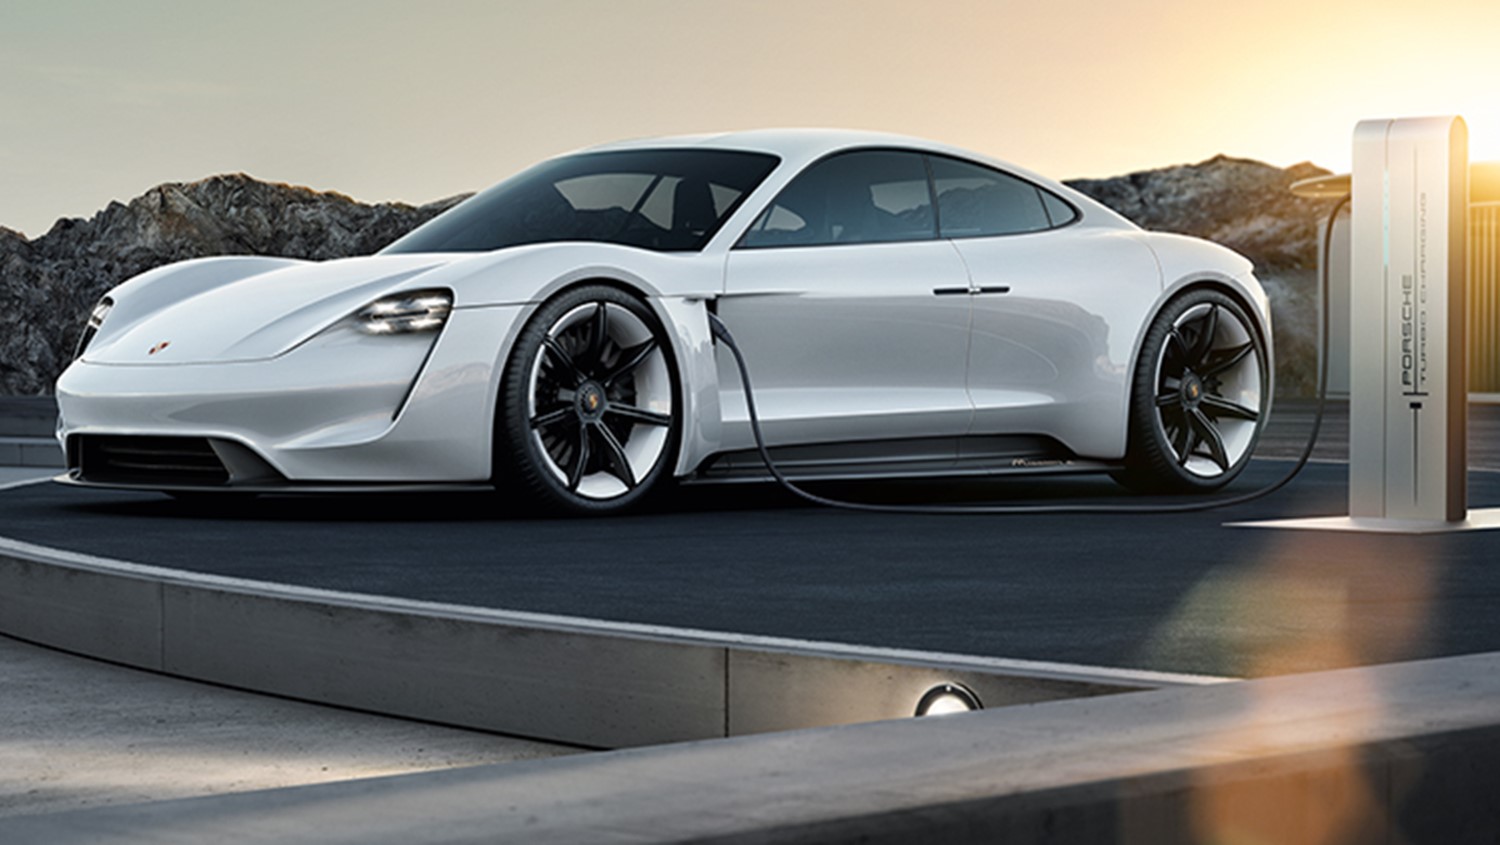 The Porsche Mission E will be the first EV that can take full advantage of 350-kW chargers